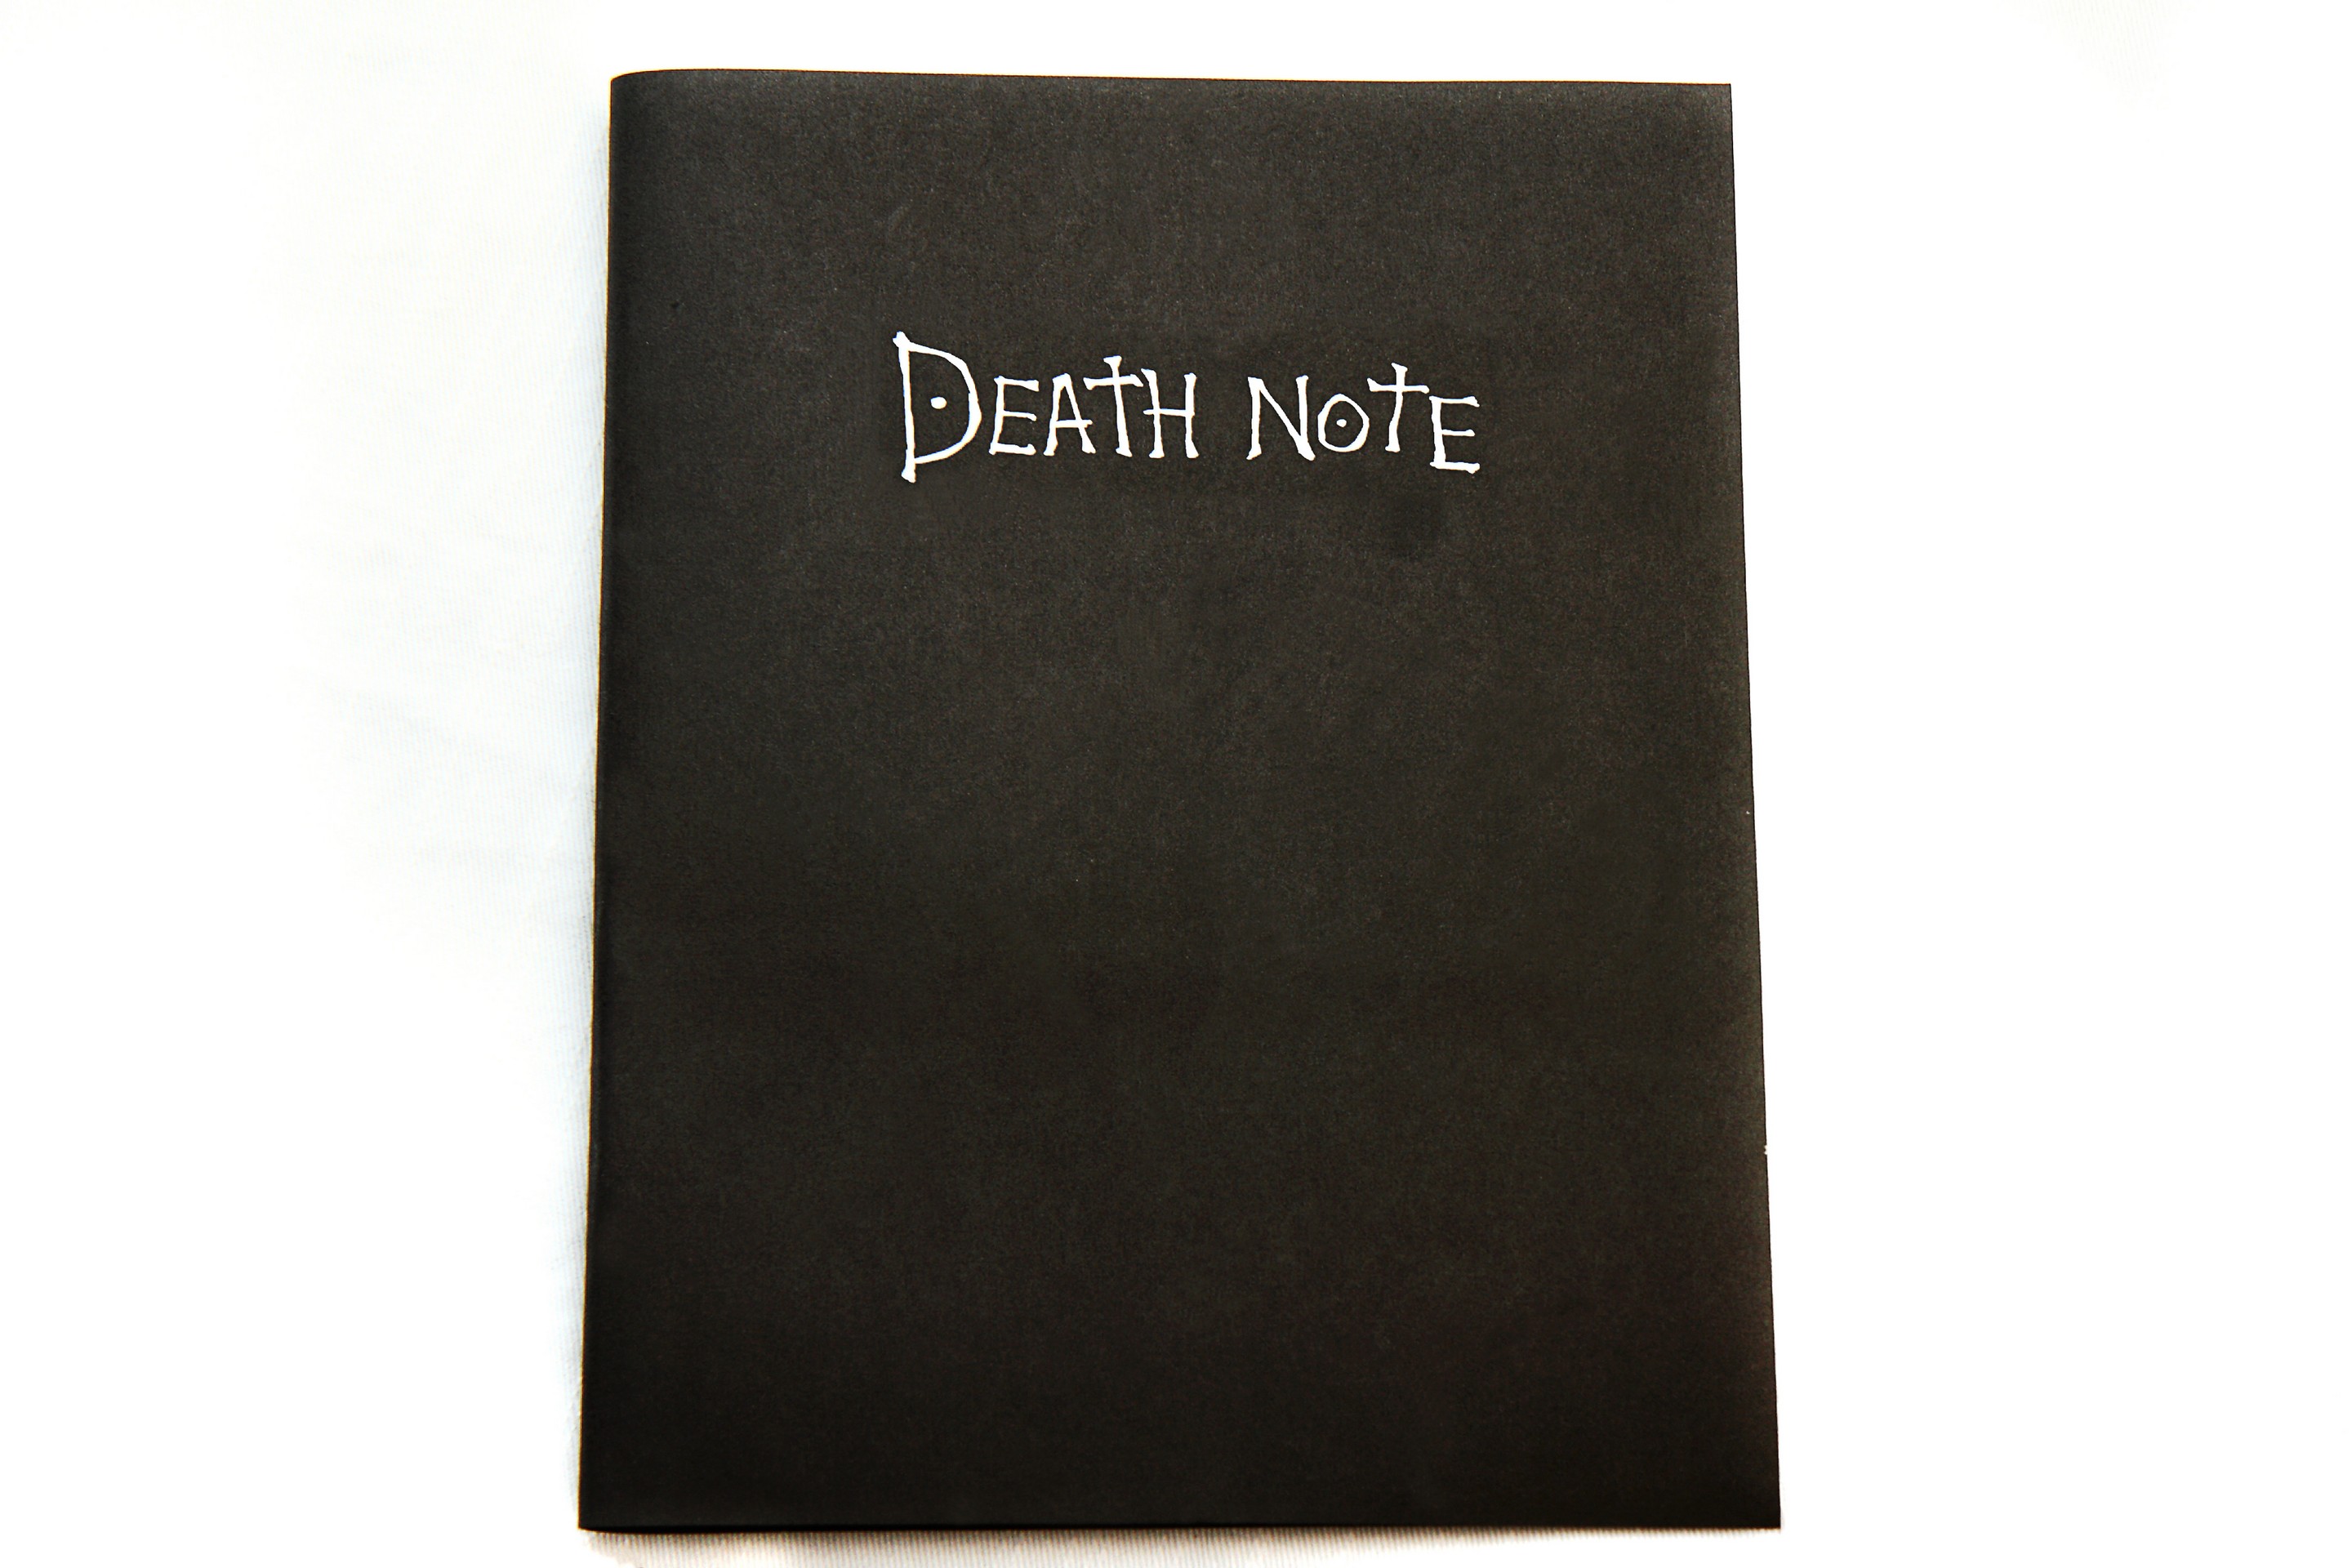 The Death Note is some pretty strange shit. 